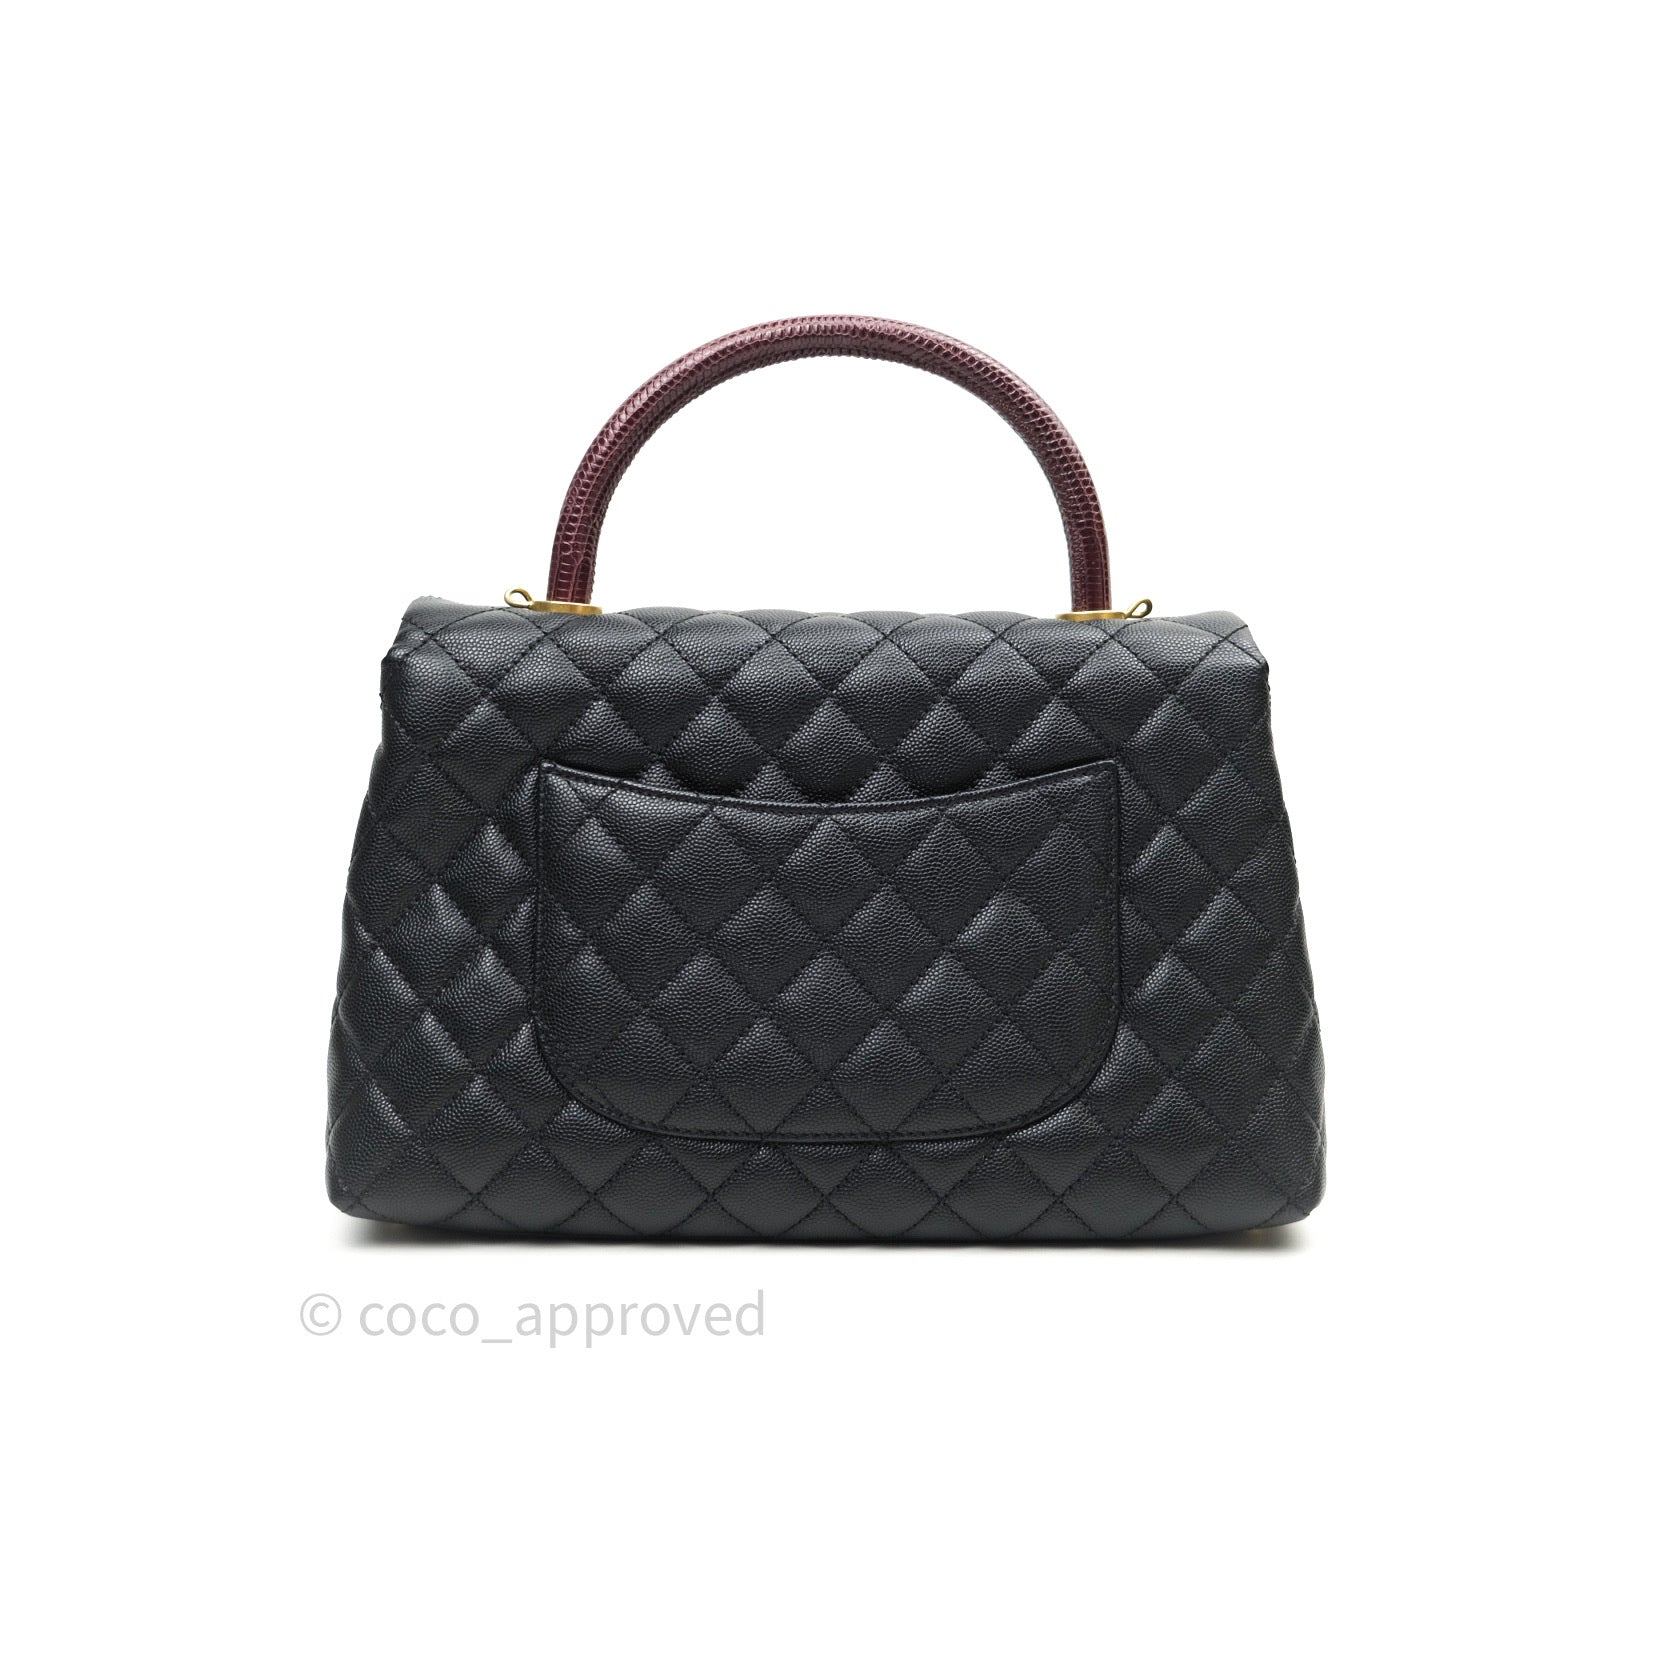 Chanel Coco Handle Small Flap Bag Black/Burgundy with Lizard Top